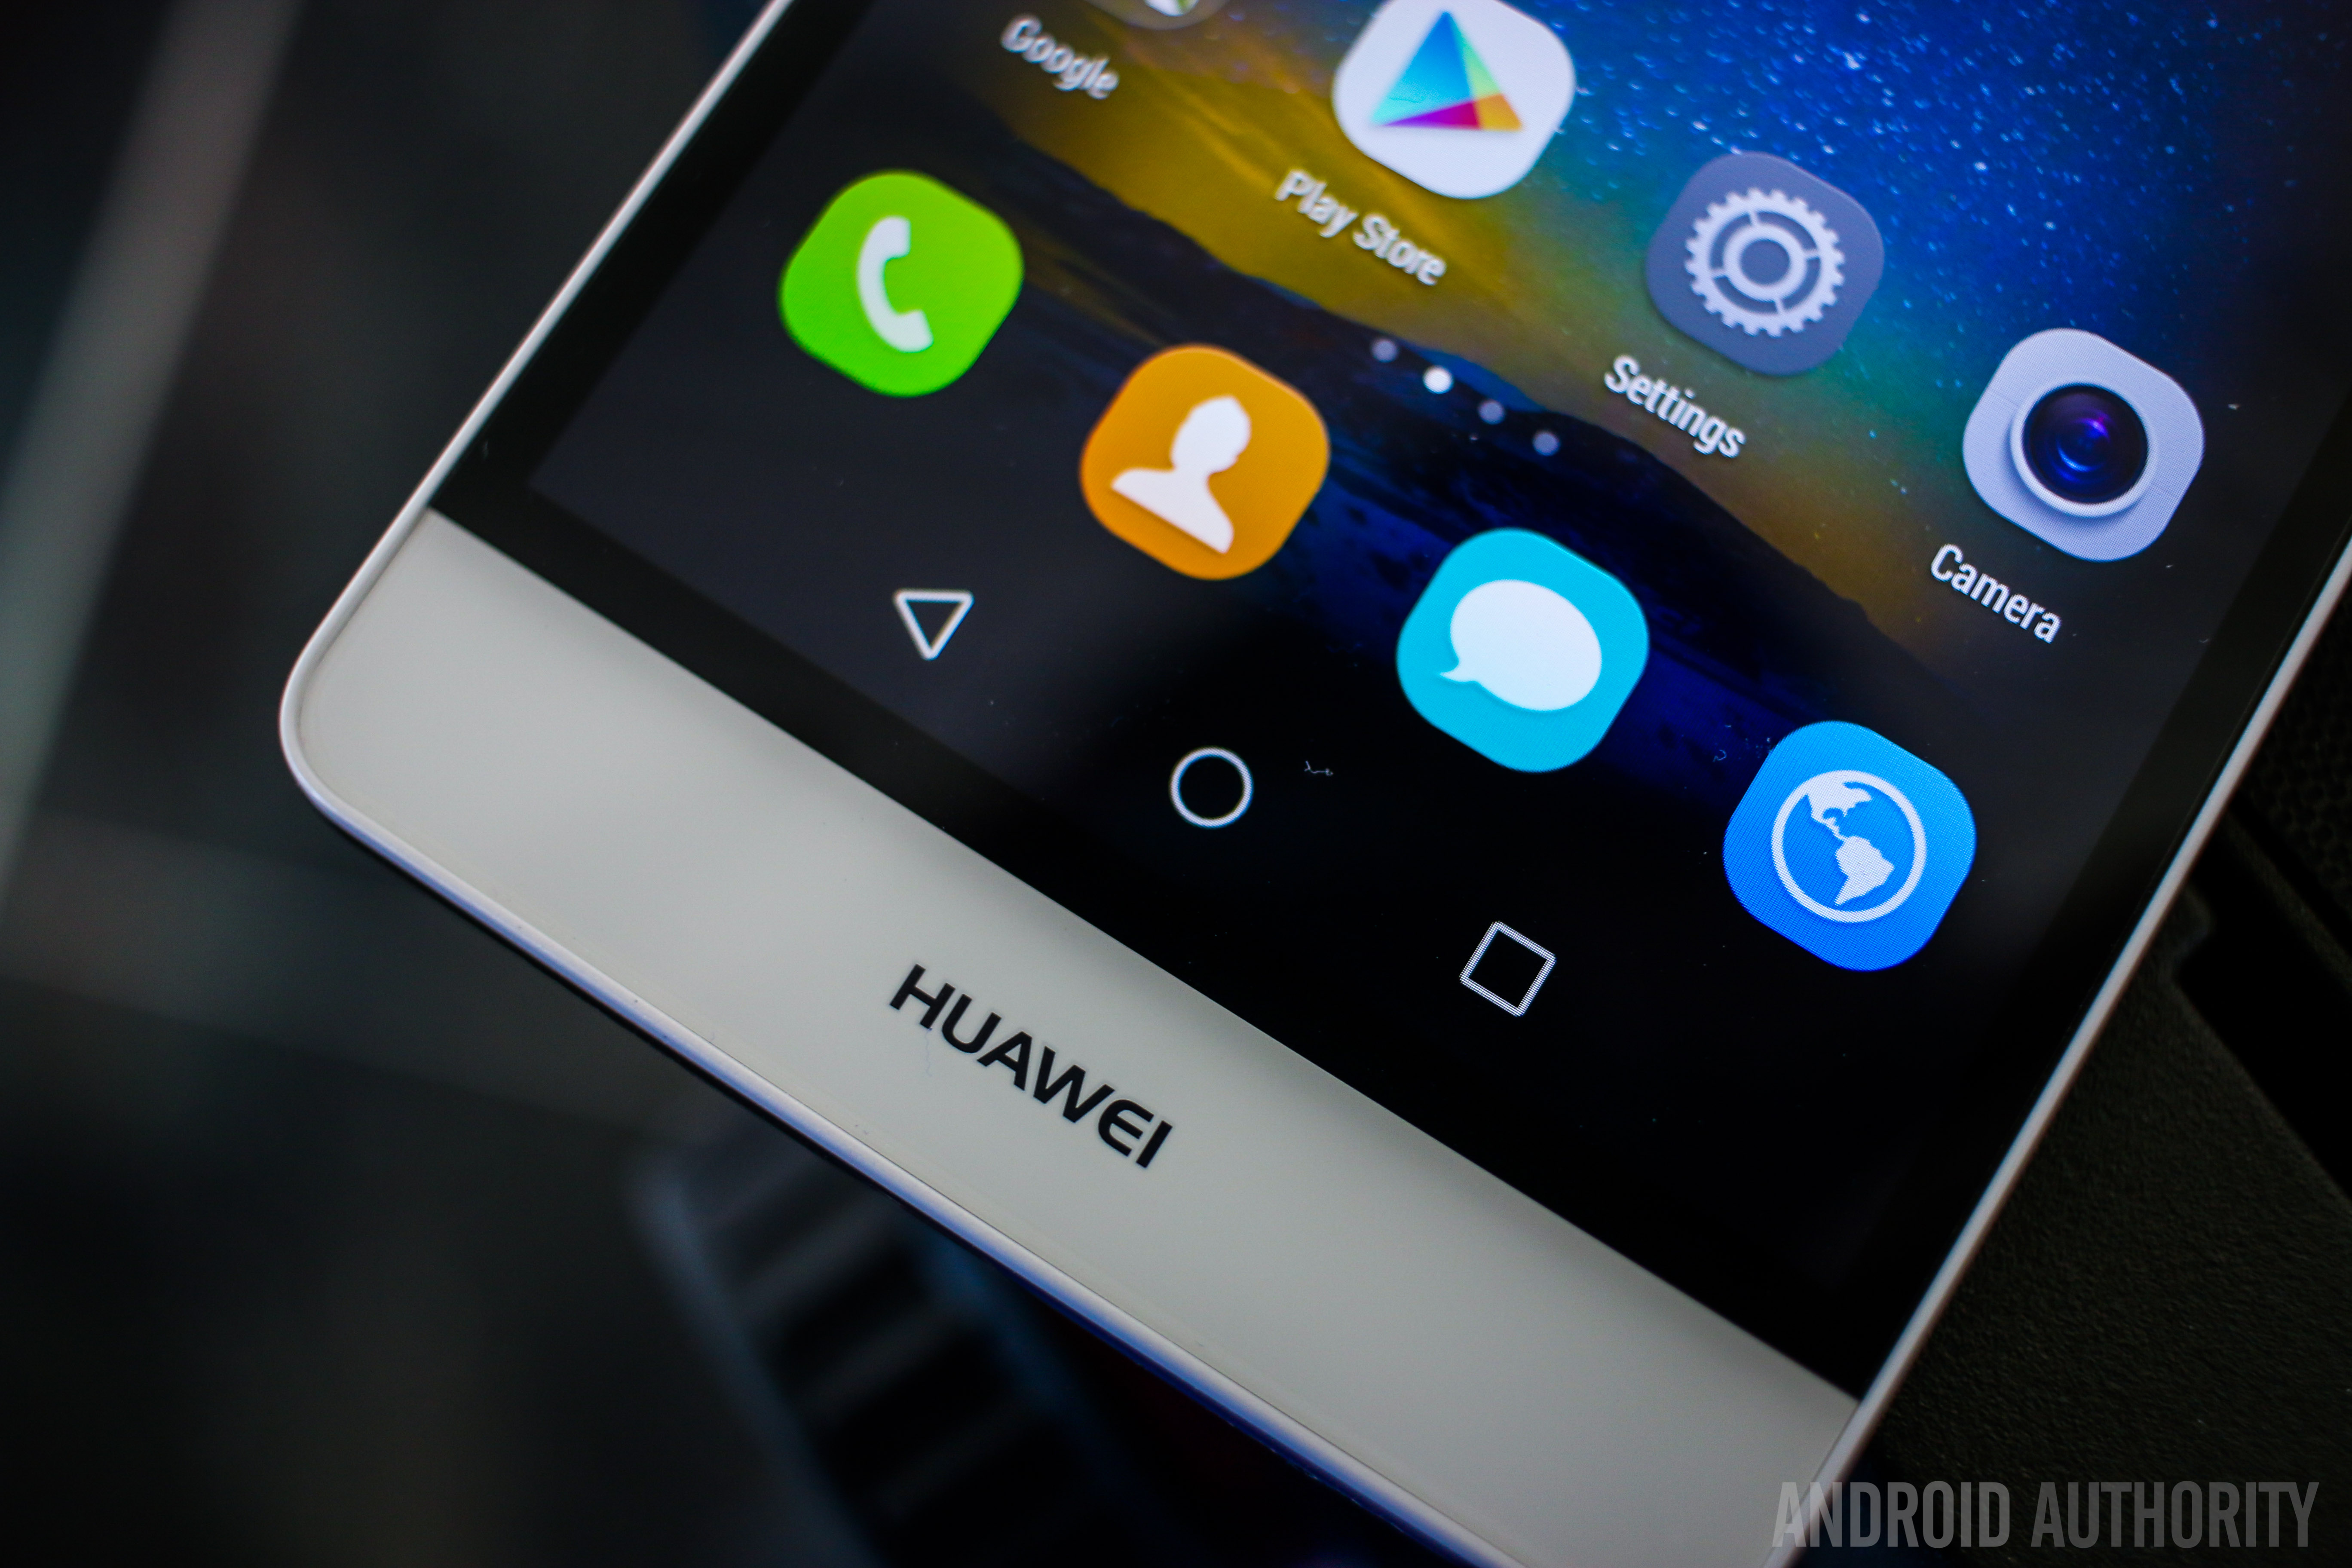 Huawei P8 Lite Hands On-12